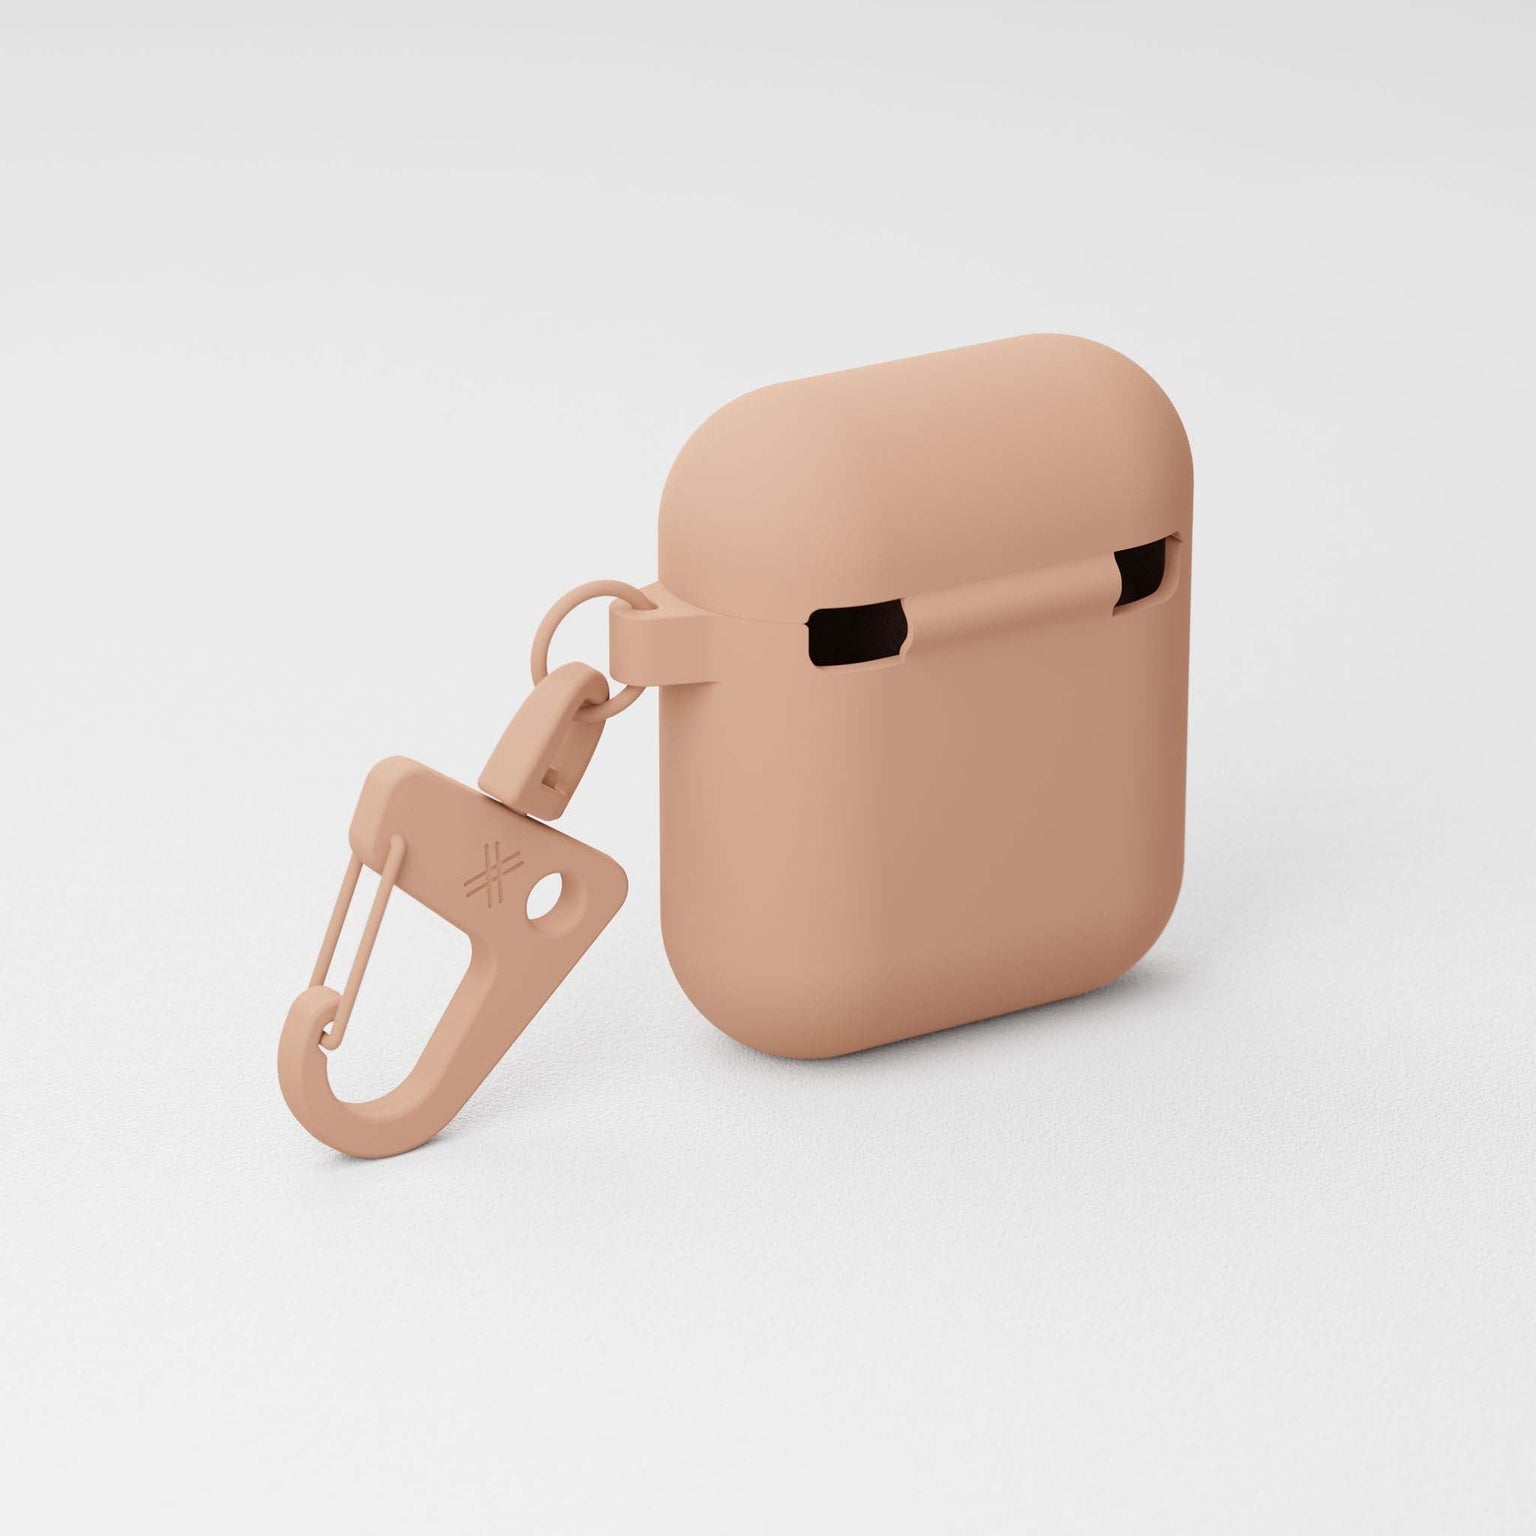 Apple AirPods case 1st and 2nd generation in Powder Pink | XOUXOU